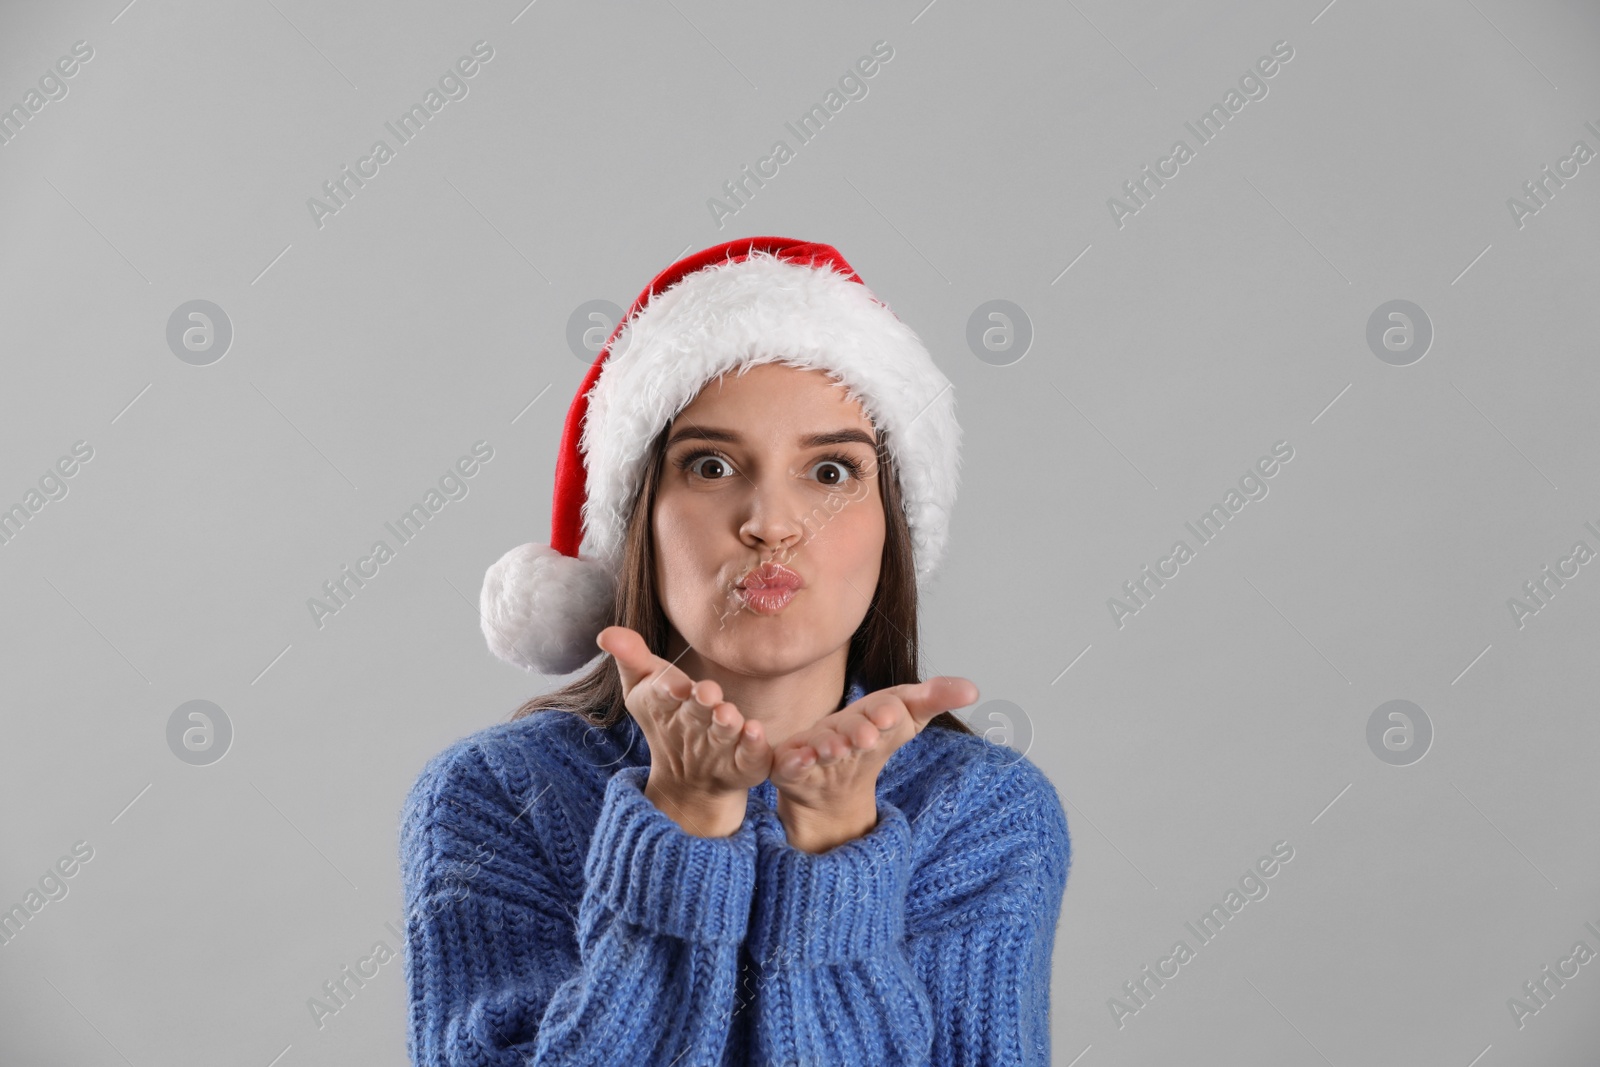 Photo of Pretty woman in Santa hat and blue sweater blowing kiss on grey background